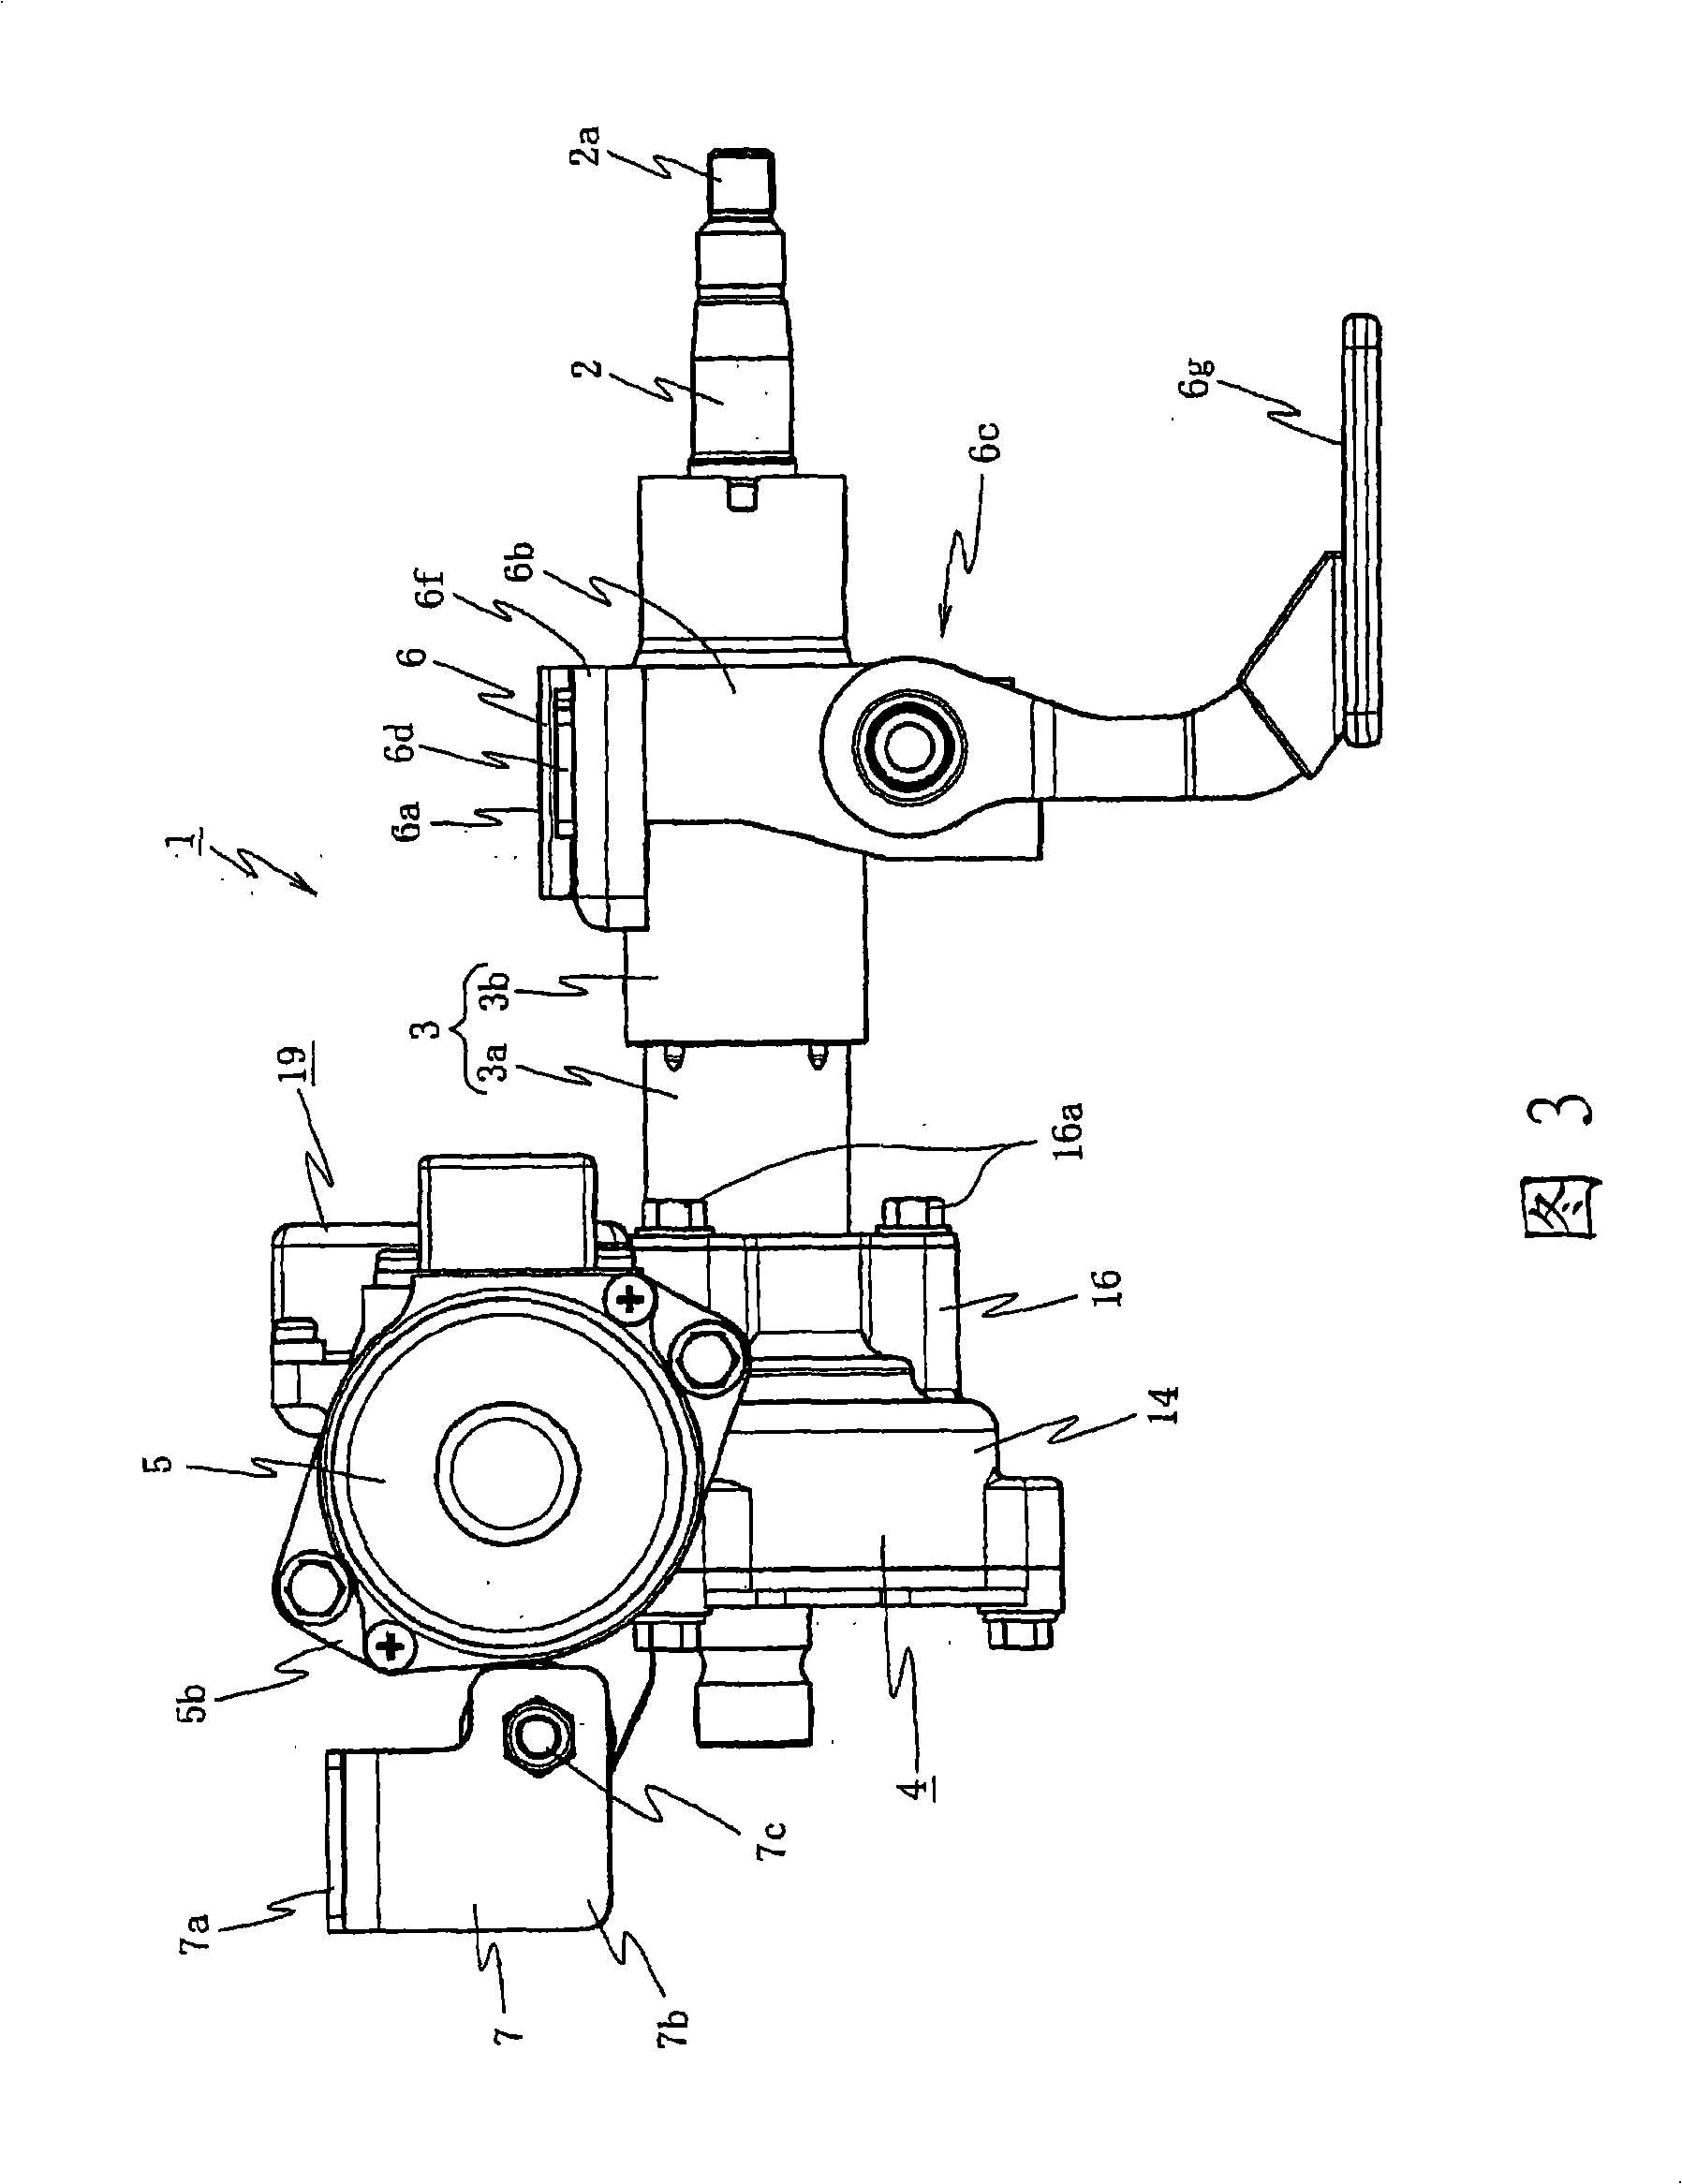 Electric power steering device and method of assembling the same